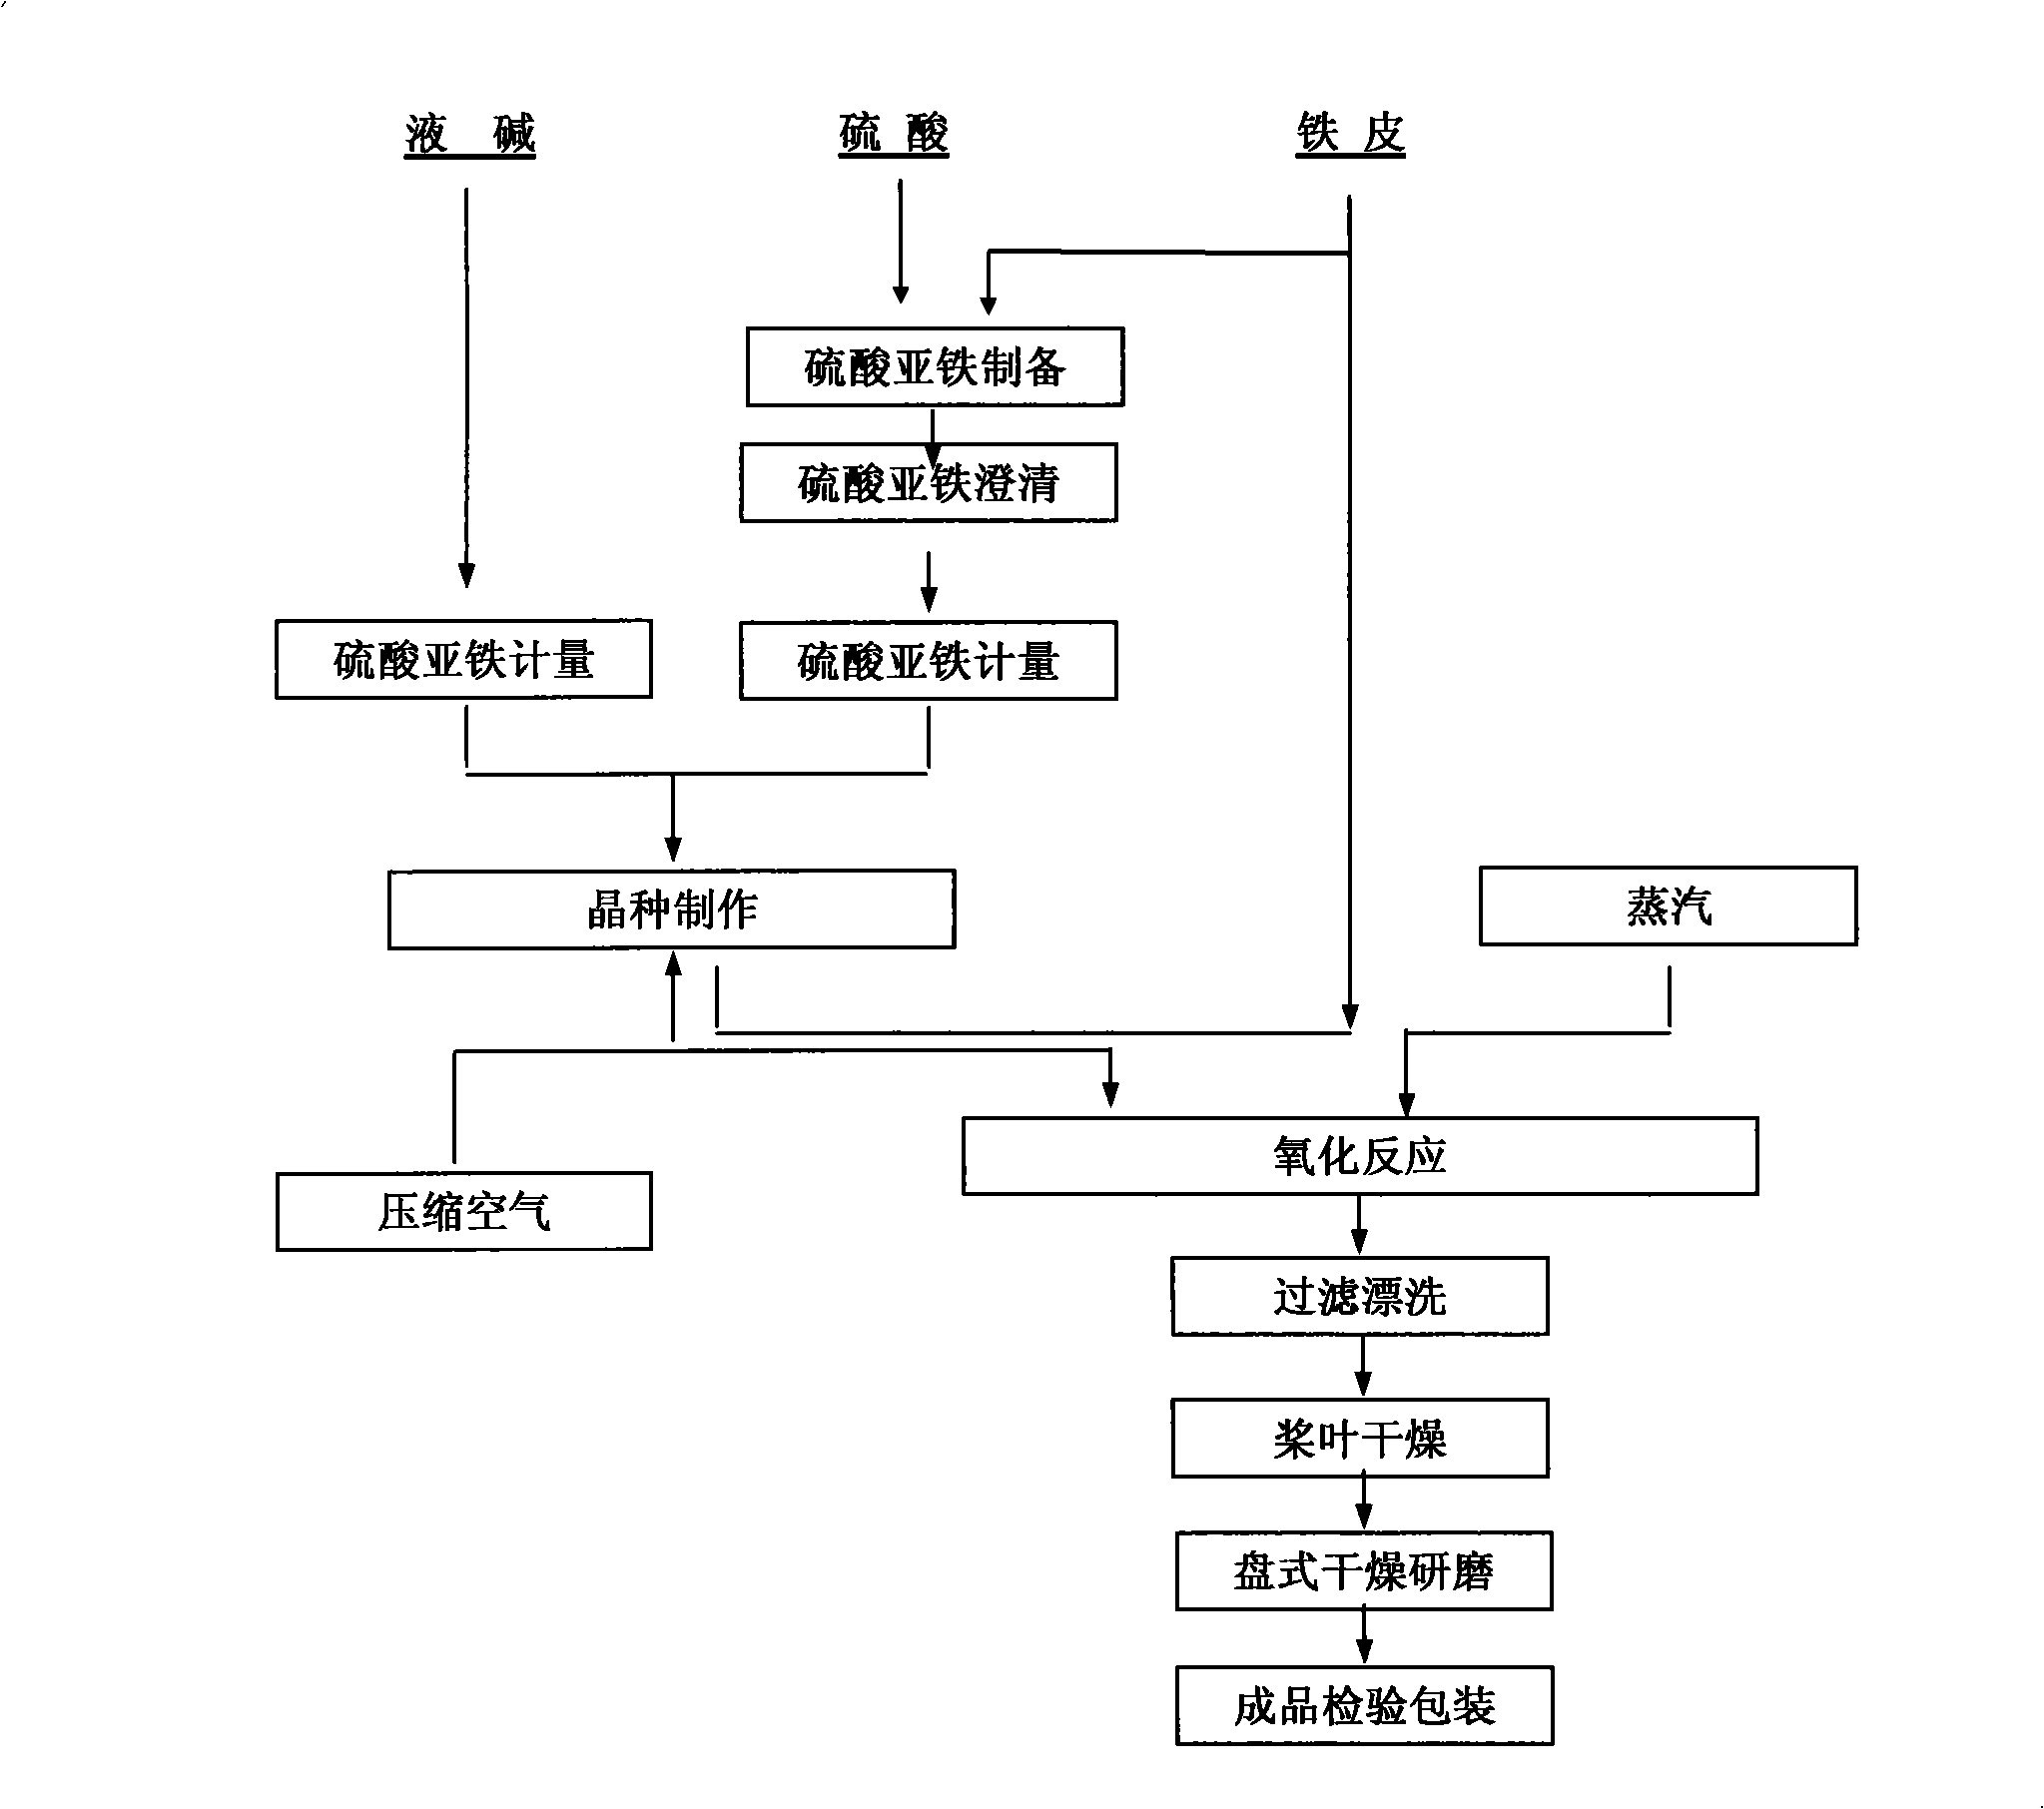 Method for producing high-density high-quality iron oxide yellow pigment